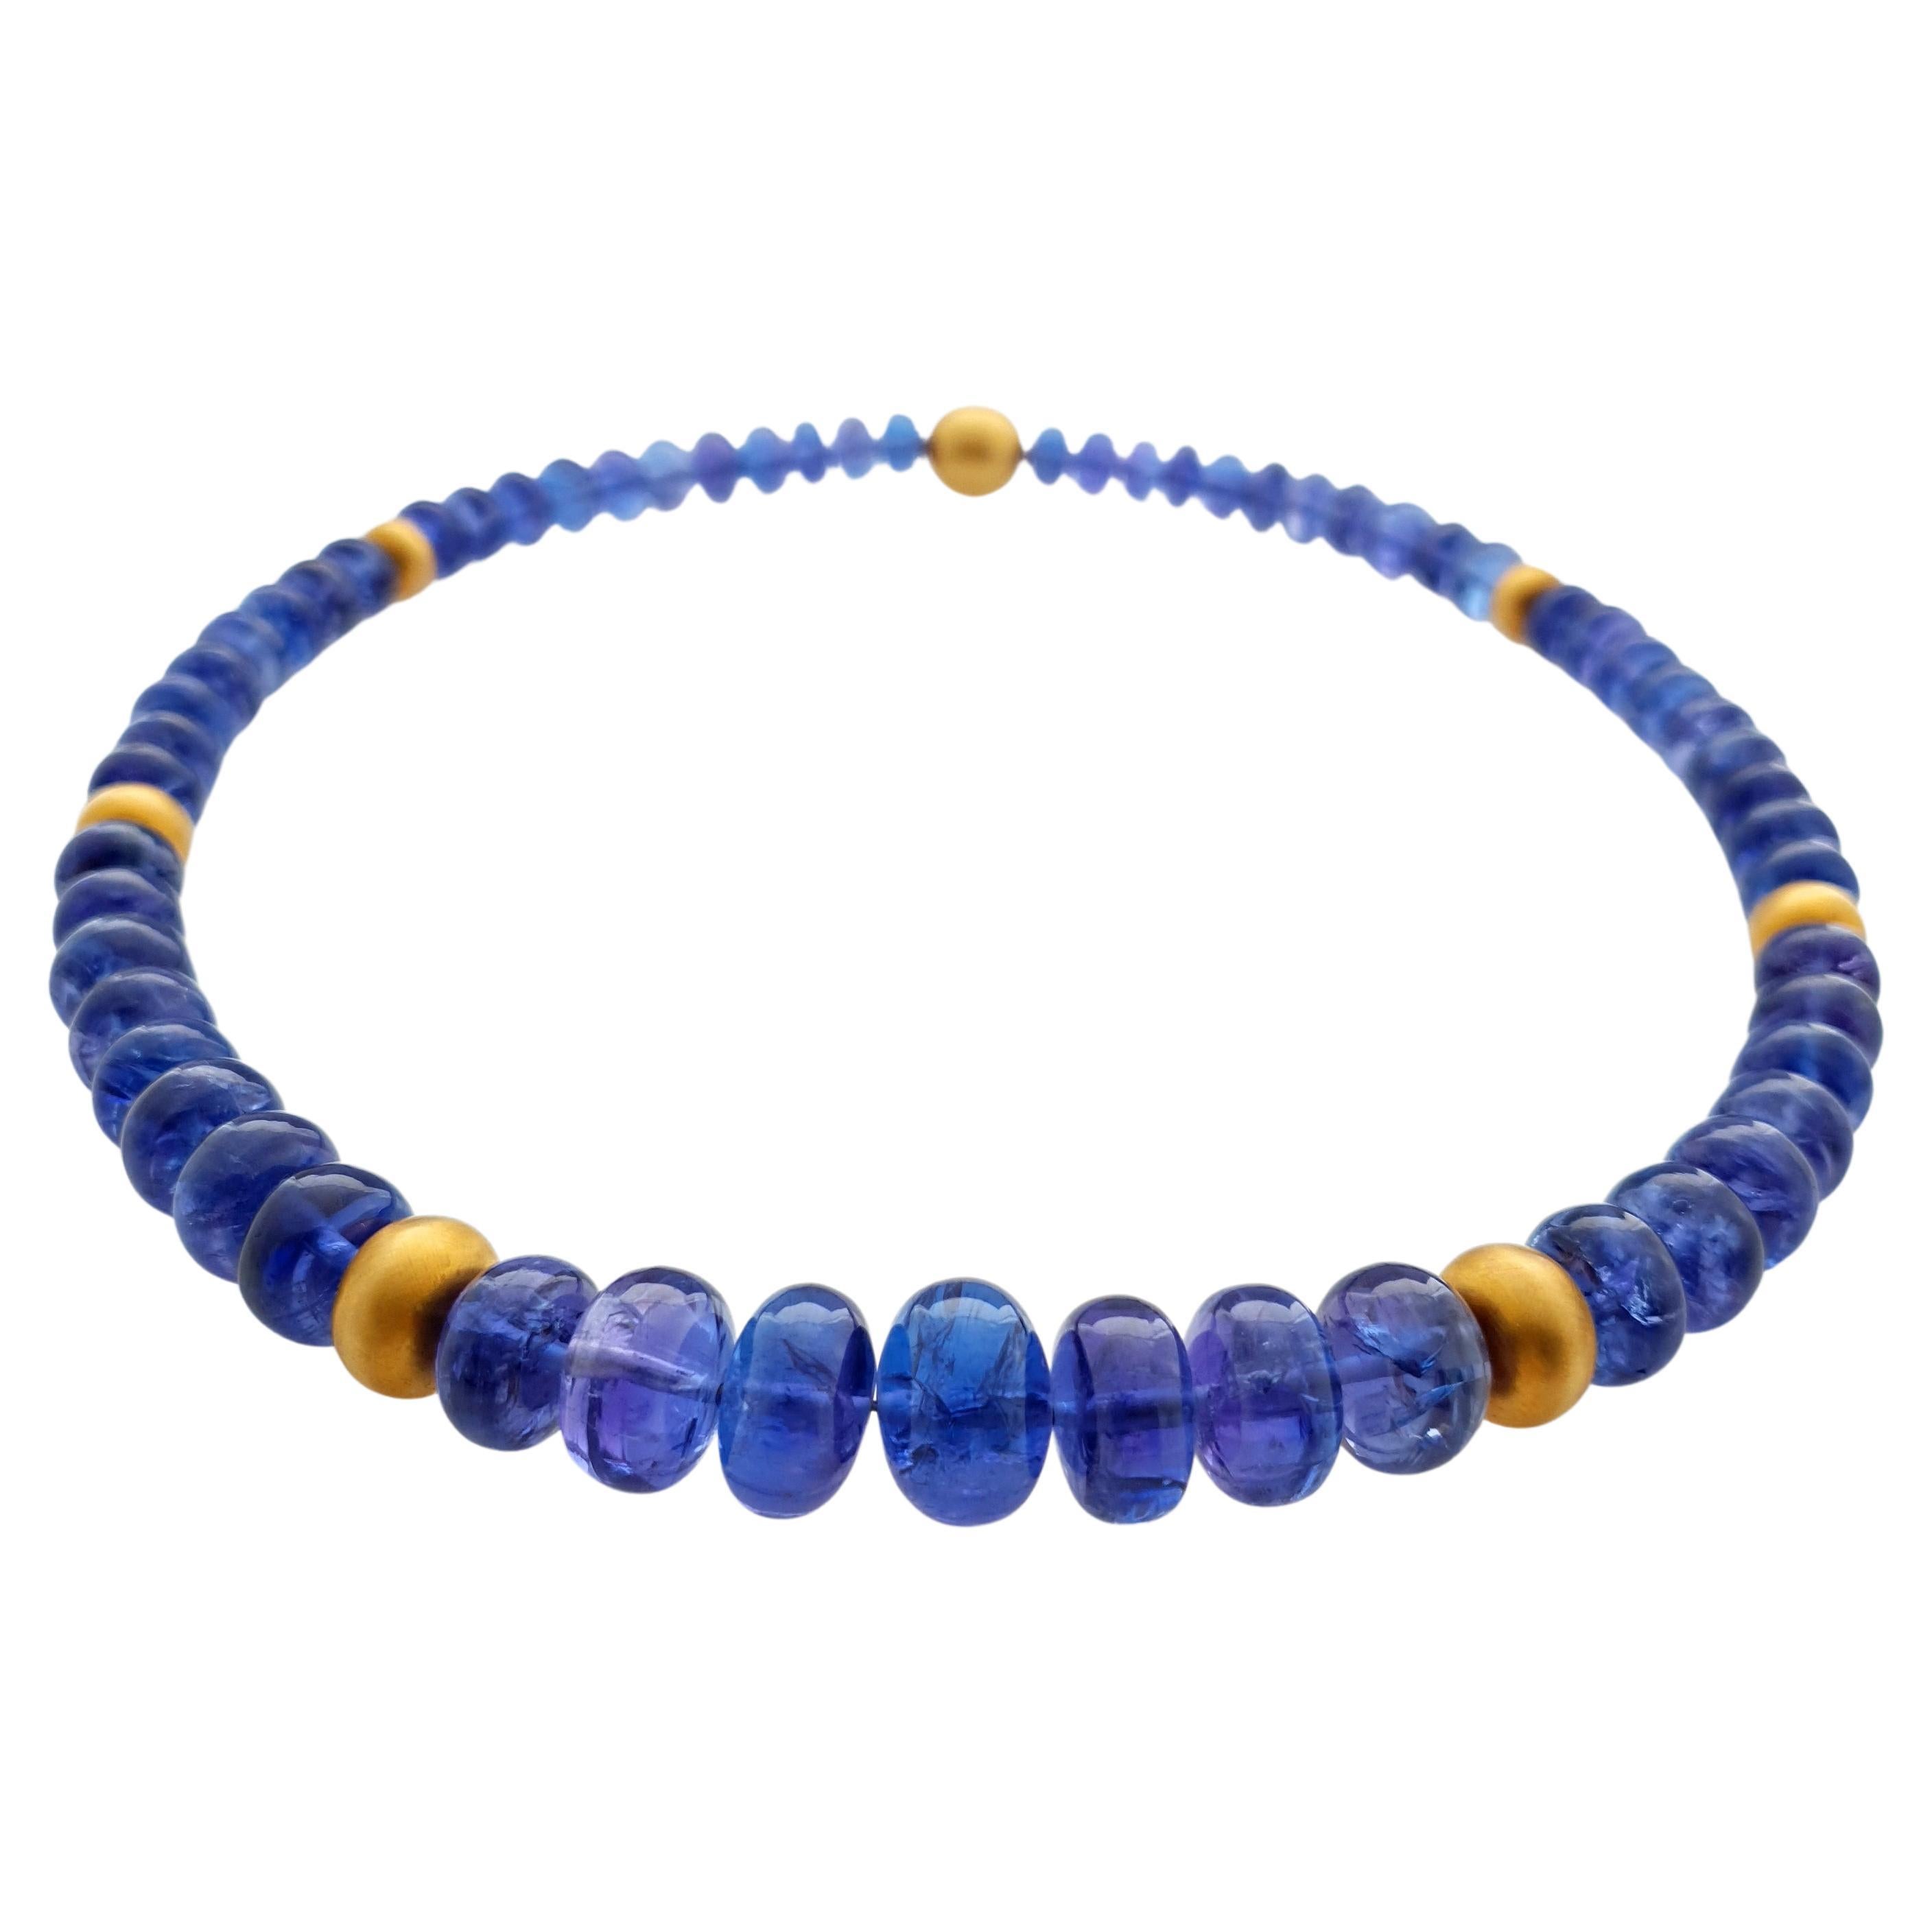 Cornflower Blue Tanzanite Rondel Beaded Necklace with 18 Carat Mat Yellow Gold